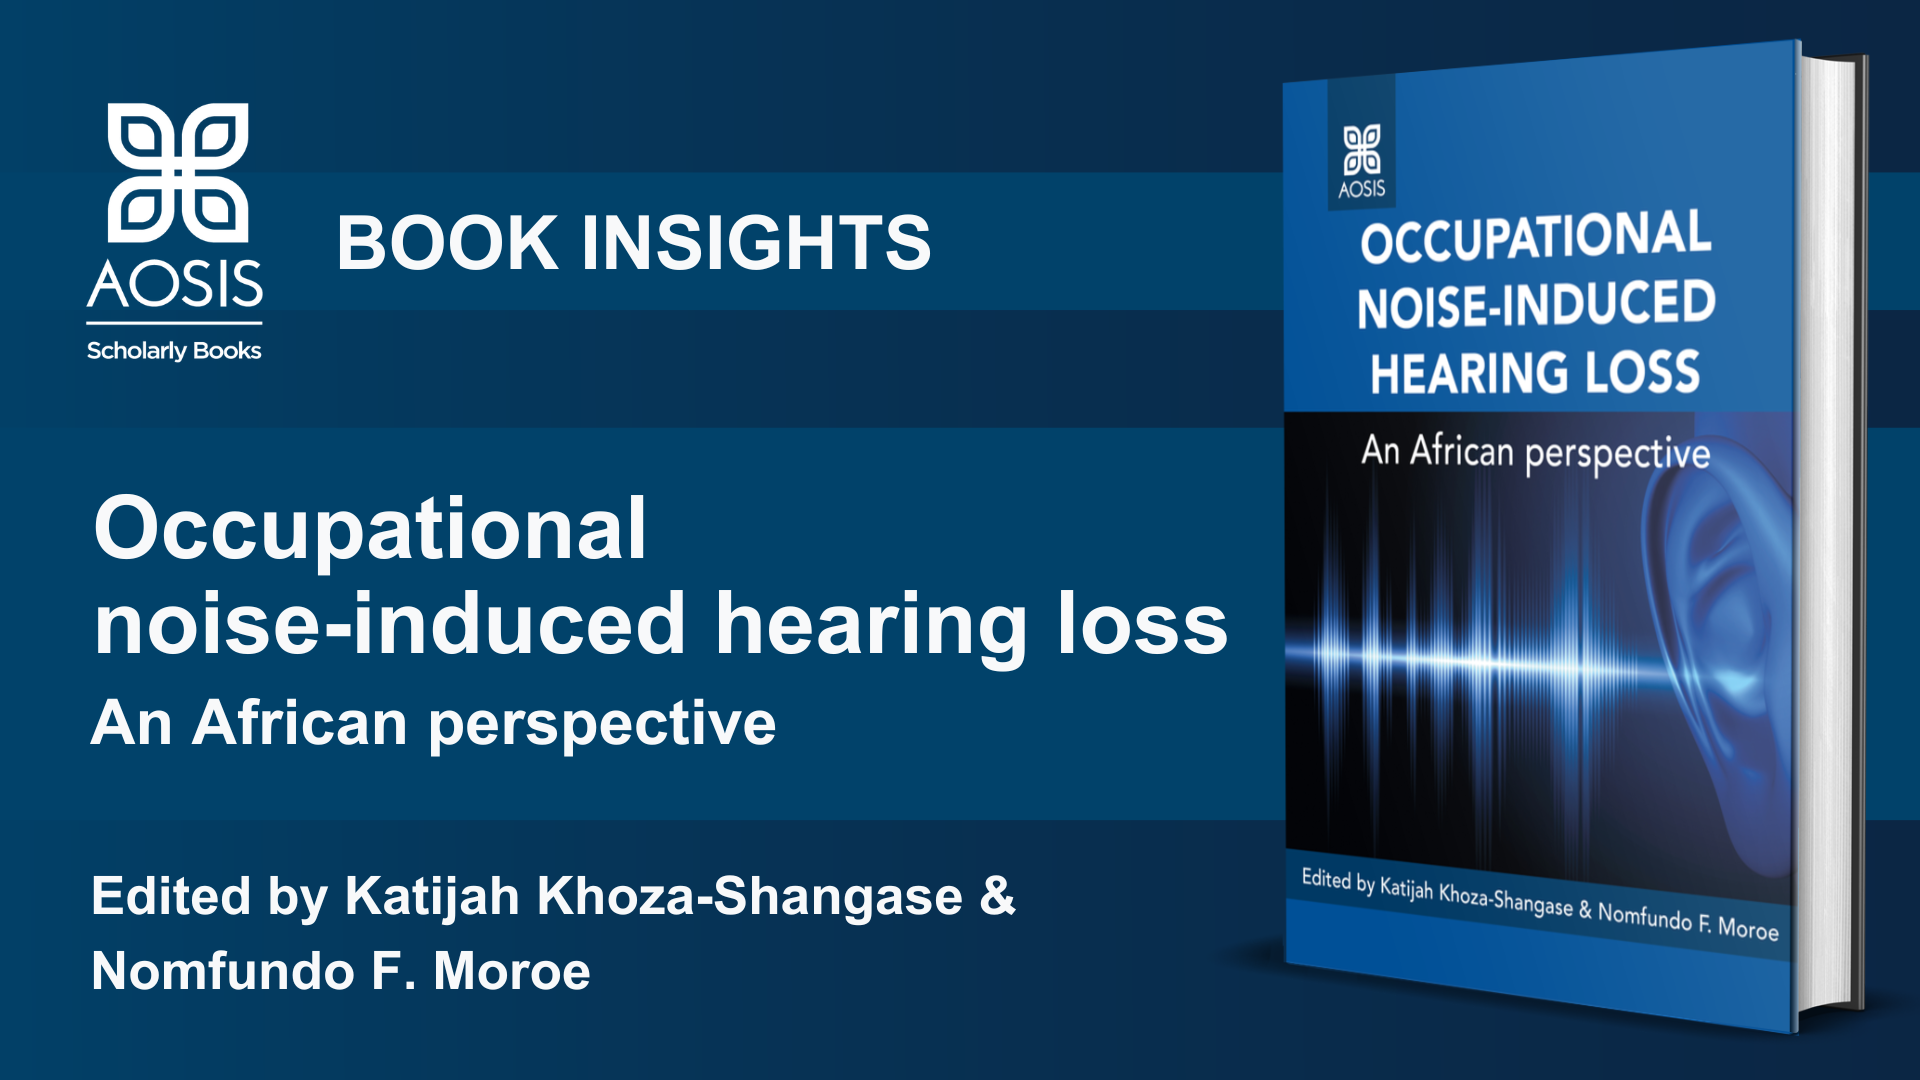 AOSIS book published – Occupational noise-induced hearing loss: An African perspective